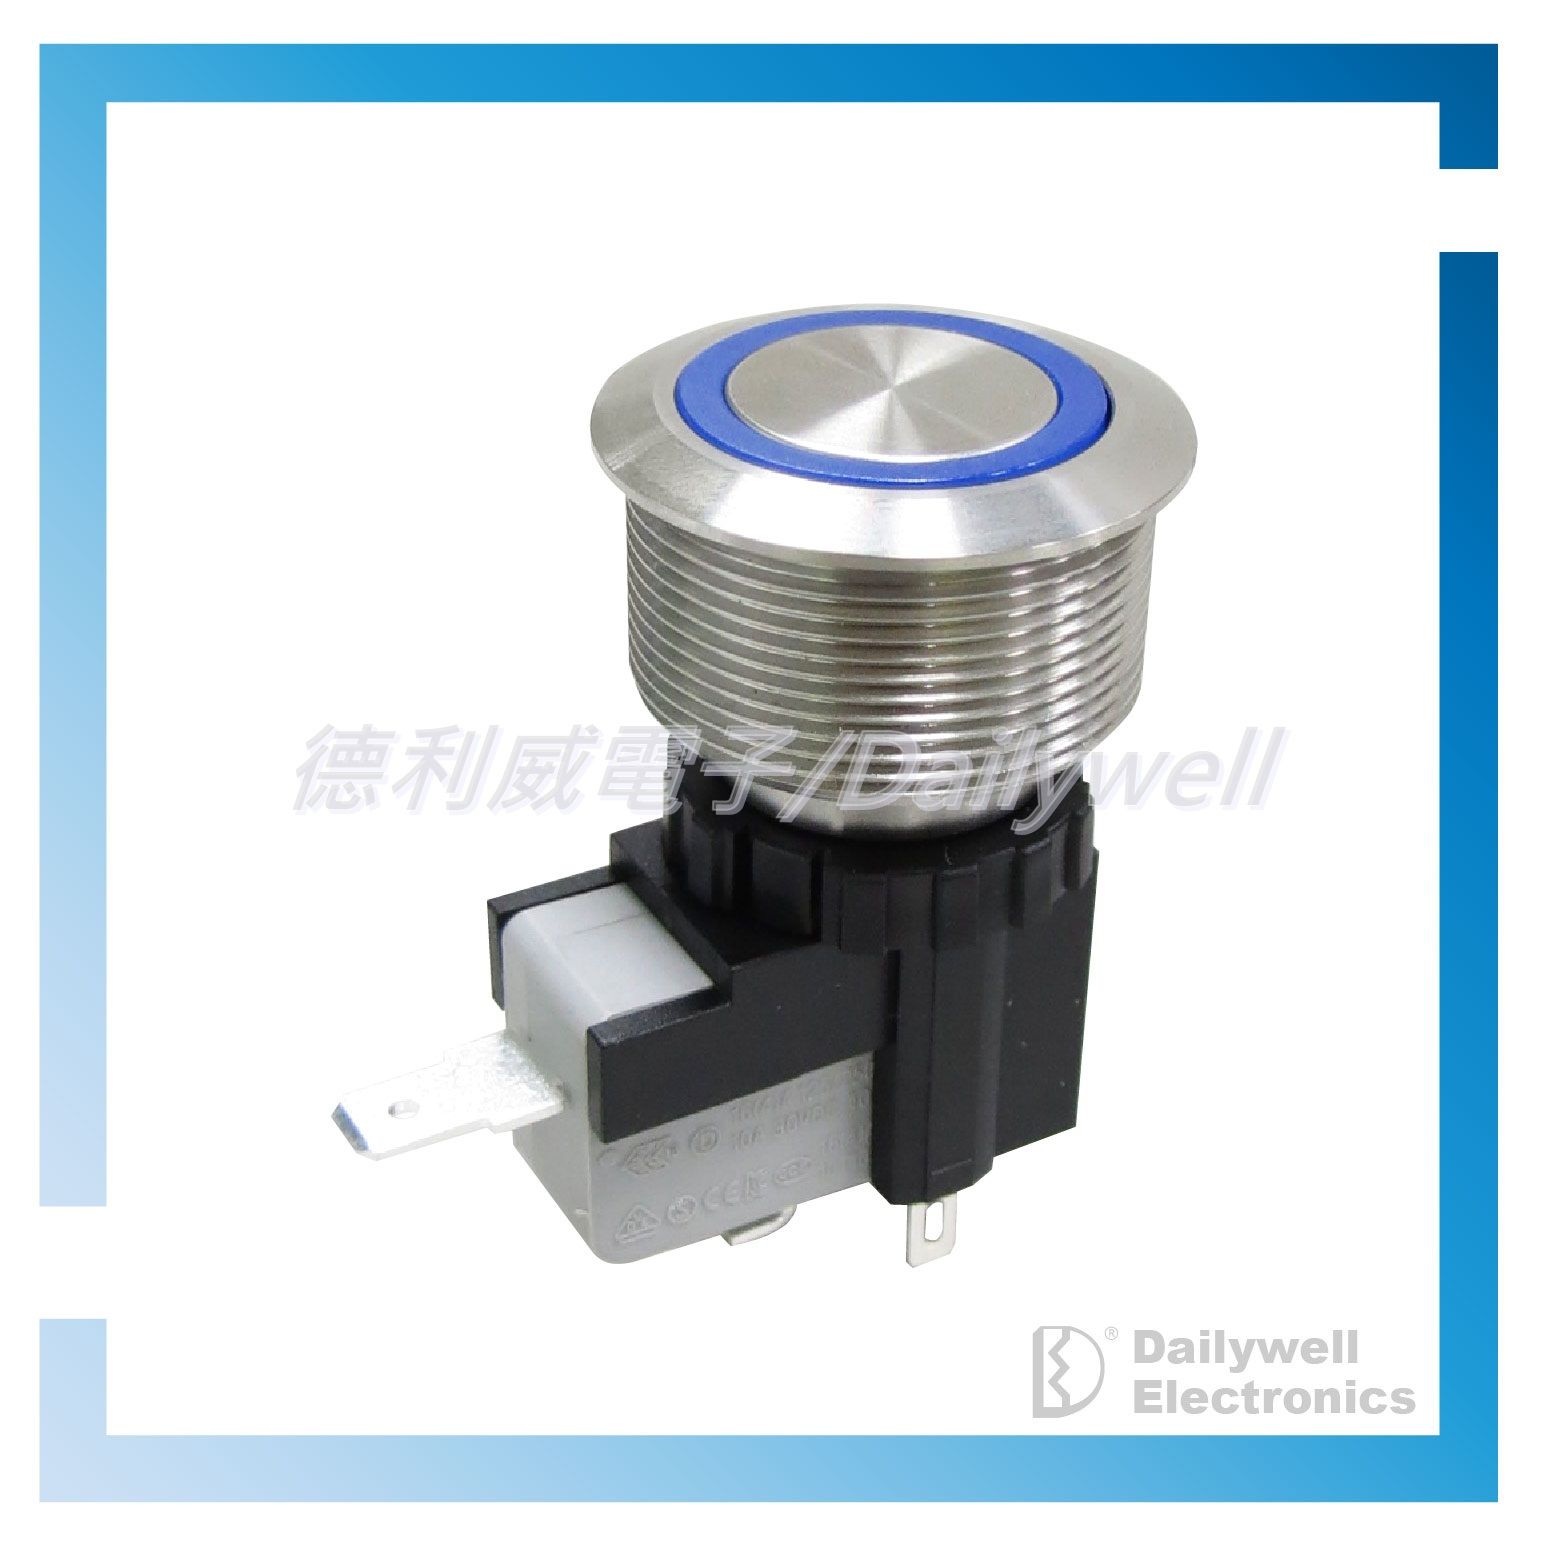 25mm High Current Anti-vandal Pushbutton Switches